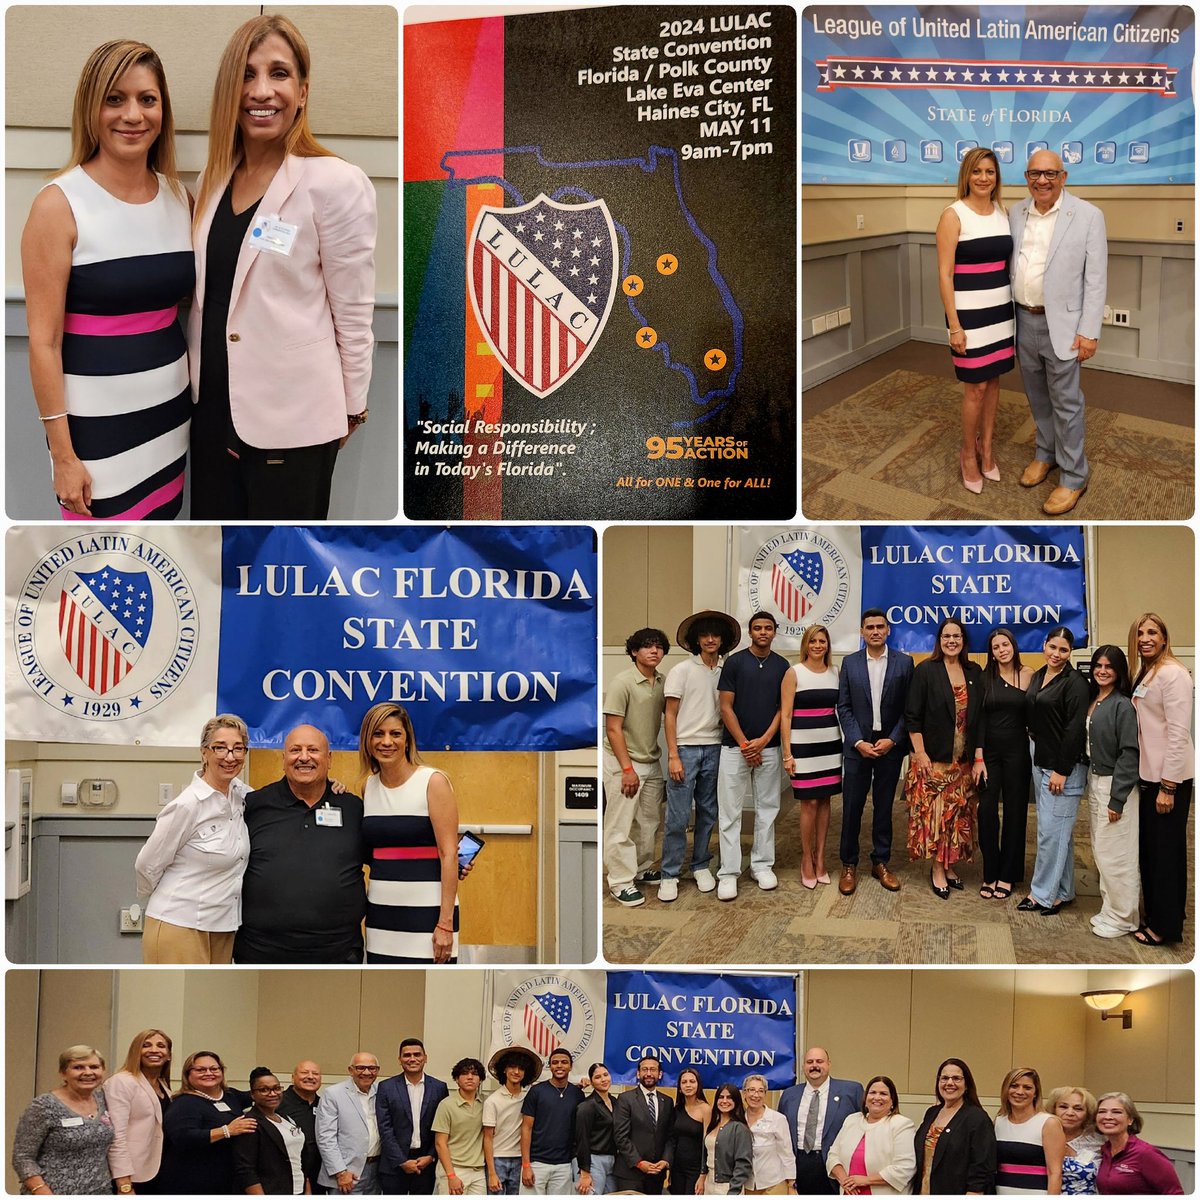 Dr.@PTREJ0 representing @Florida_ALAS at the @LULAC
State Convention in @PolkCountyFL. Working together to dismantle barriers and challenges in education; so that Hispanic/Latino students, educators, and administrators feel empowered & have the chance to succeed. @ALASEDU